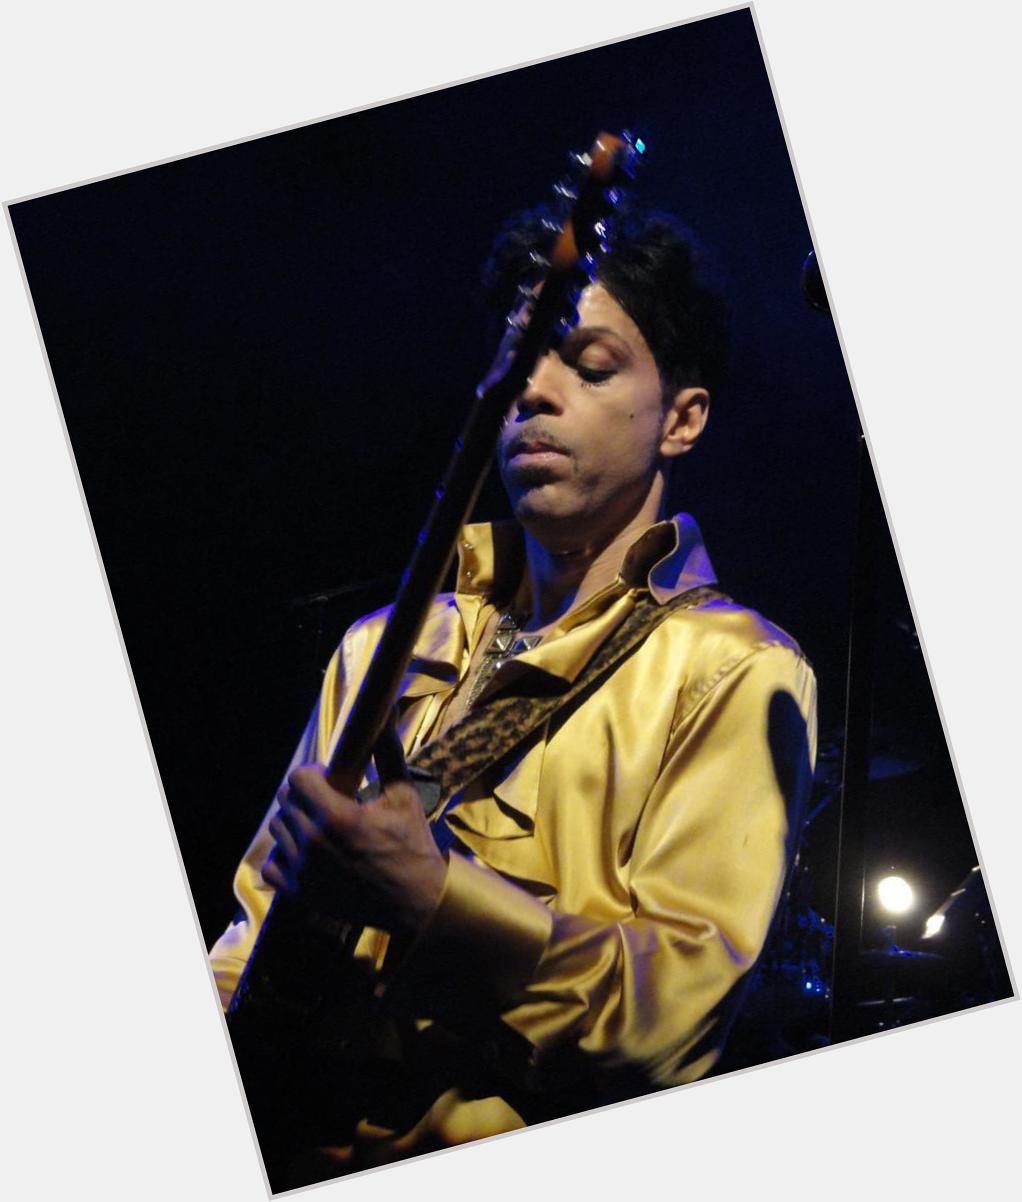 Even though he doesn\t celebrate them, happy 57th birthday to the one and only, Prince.  